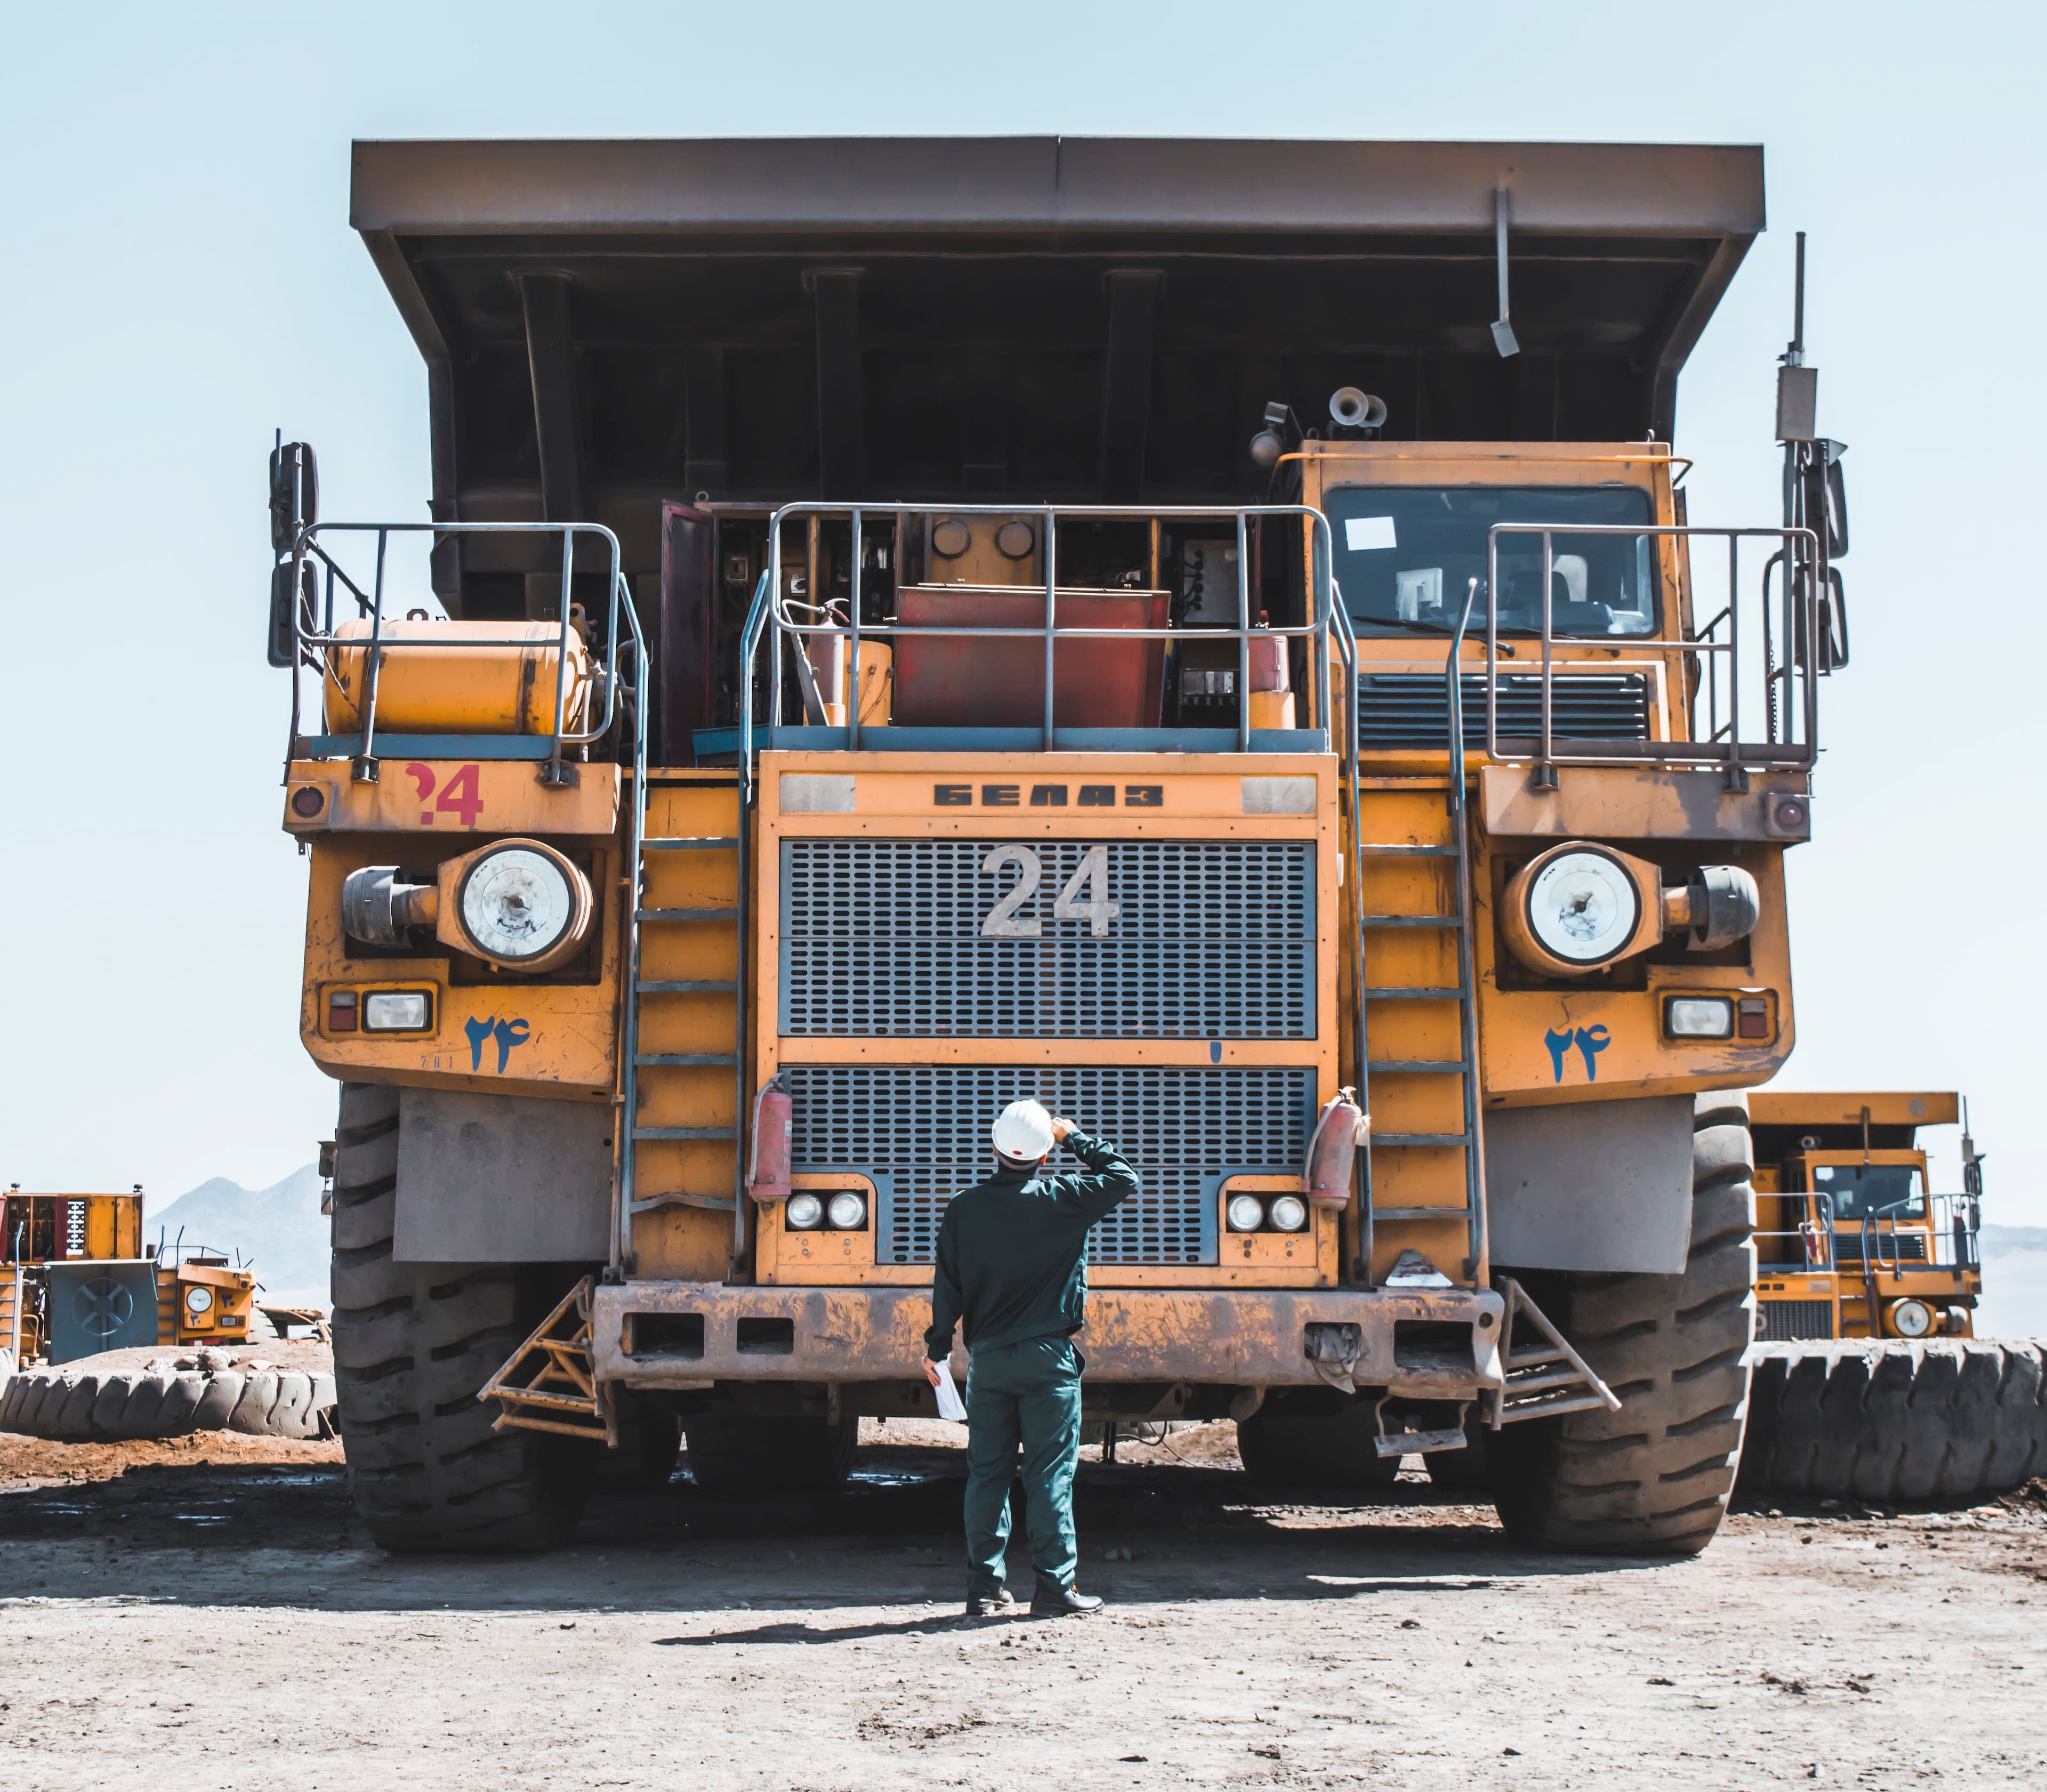 A worker standing in front of a large mining dump truck.